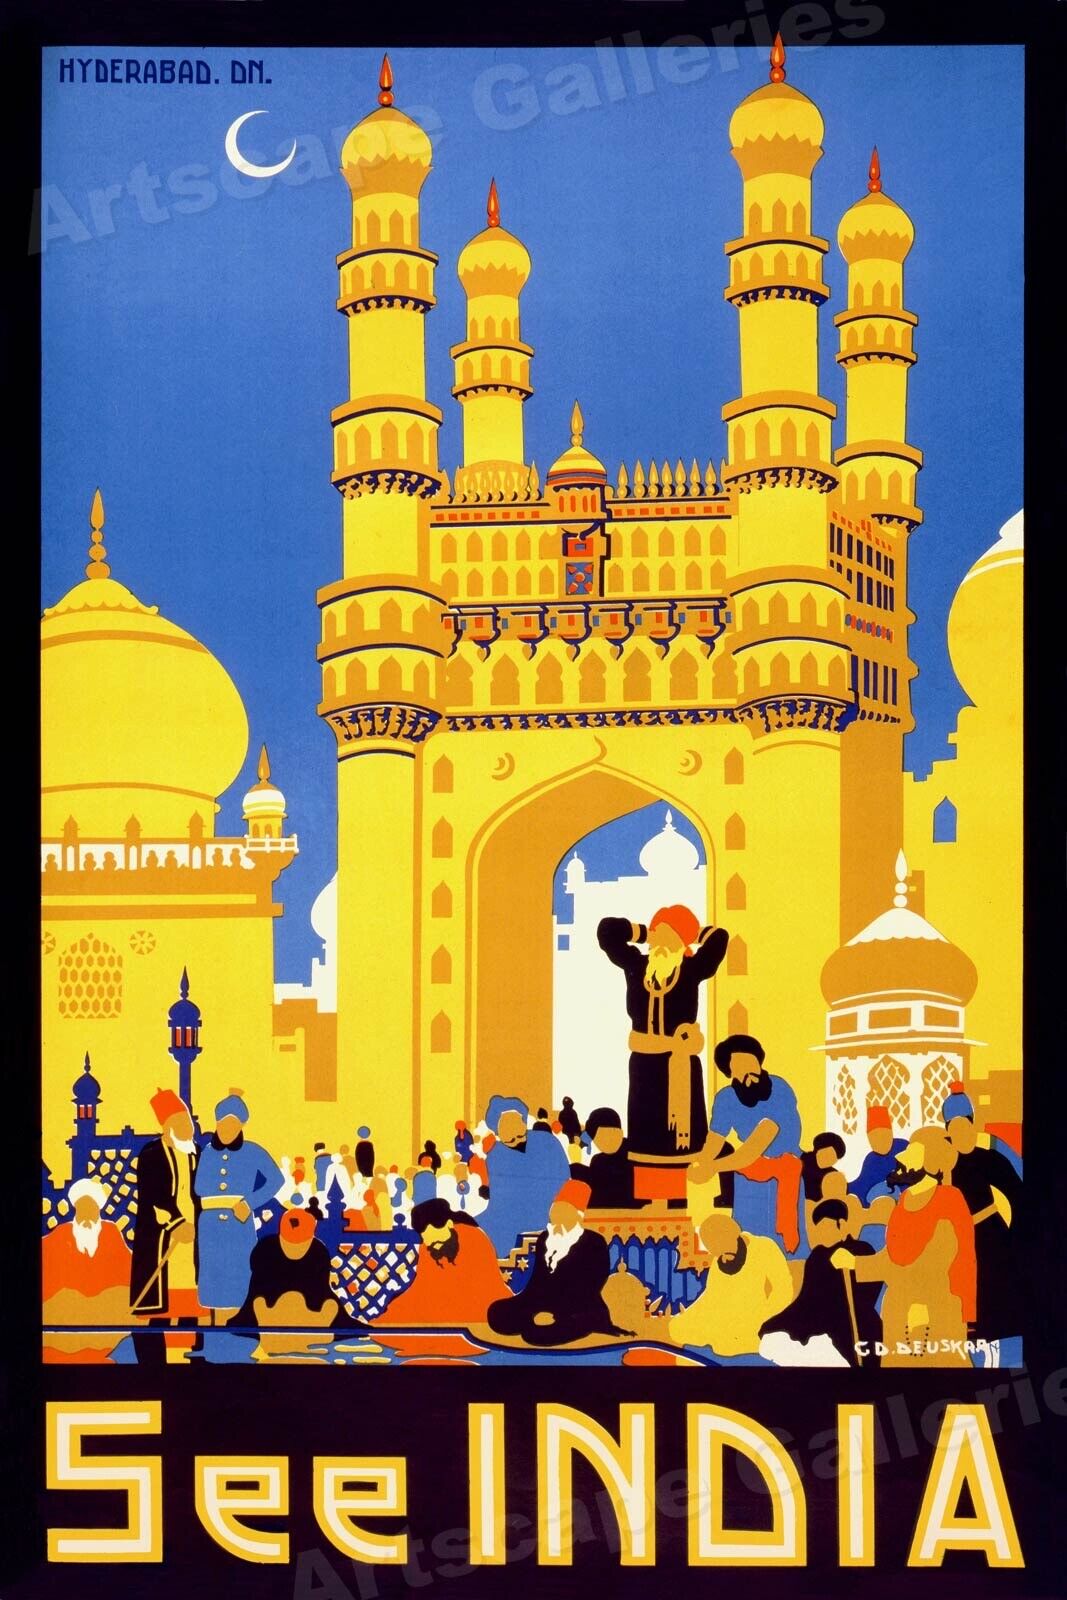 1950s Visit Charminar Hyderabad India Vintage Style Travel Poster - 20x30